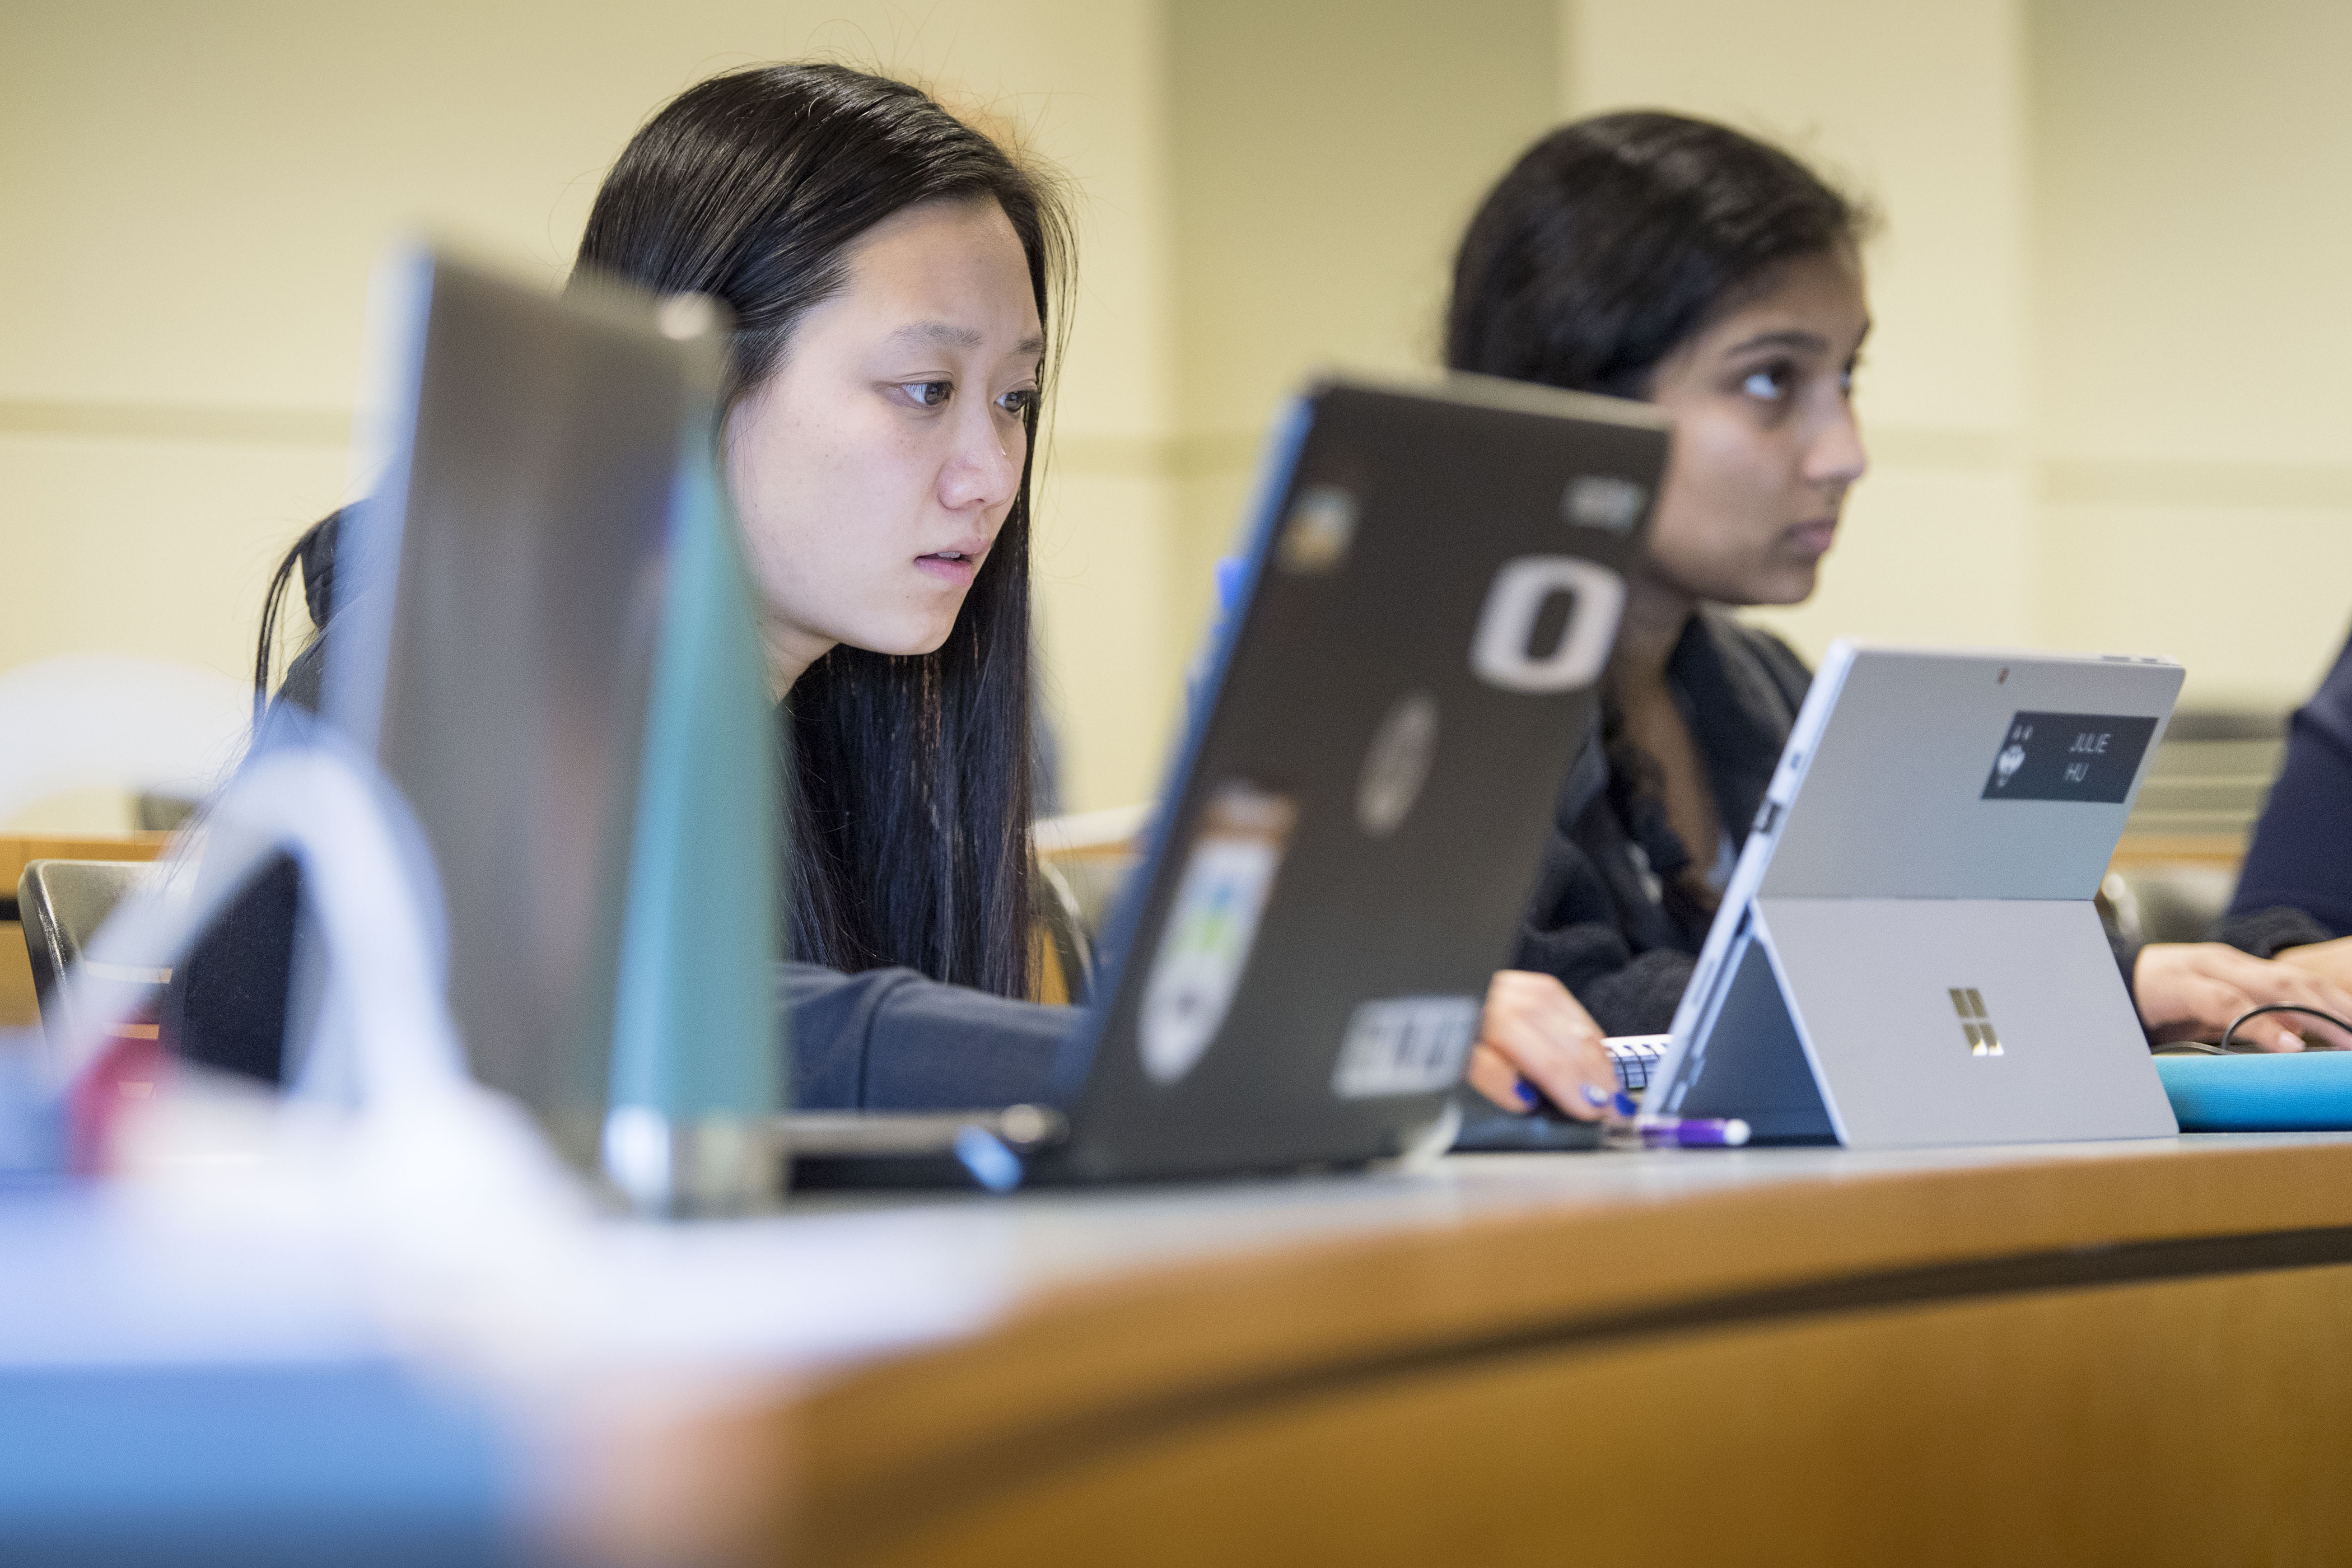 Student-athlete Julie Hu ’19 (CLAS) listening to a finance lecture by assistant professor Cristian Pinto-Gutierre in the School of Business on Feb. 21, 2018. (Sean Flynn/UConn Photo)